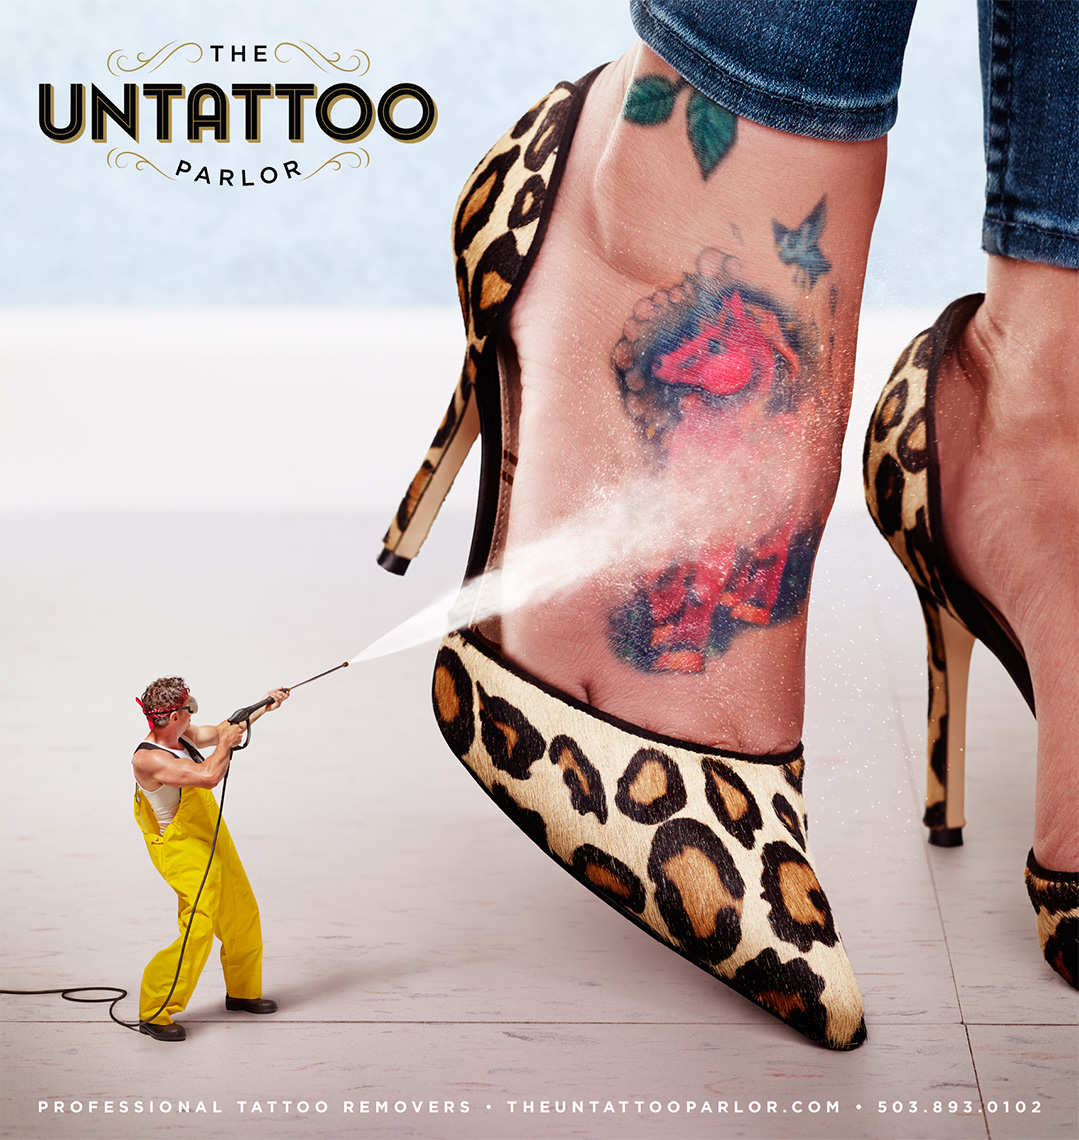 Untattoo Parlor Image Composite, Effects and Retouching